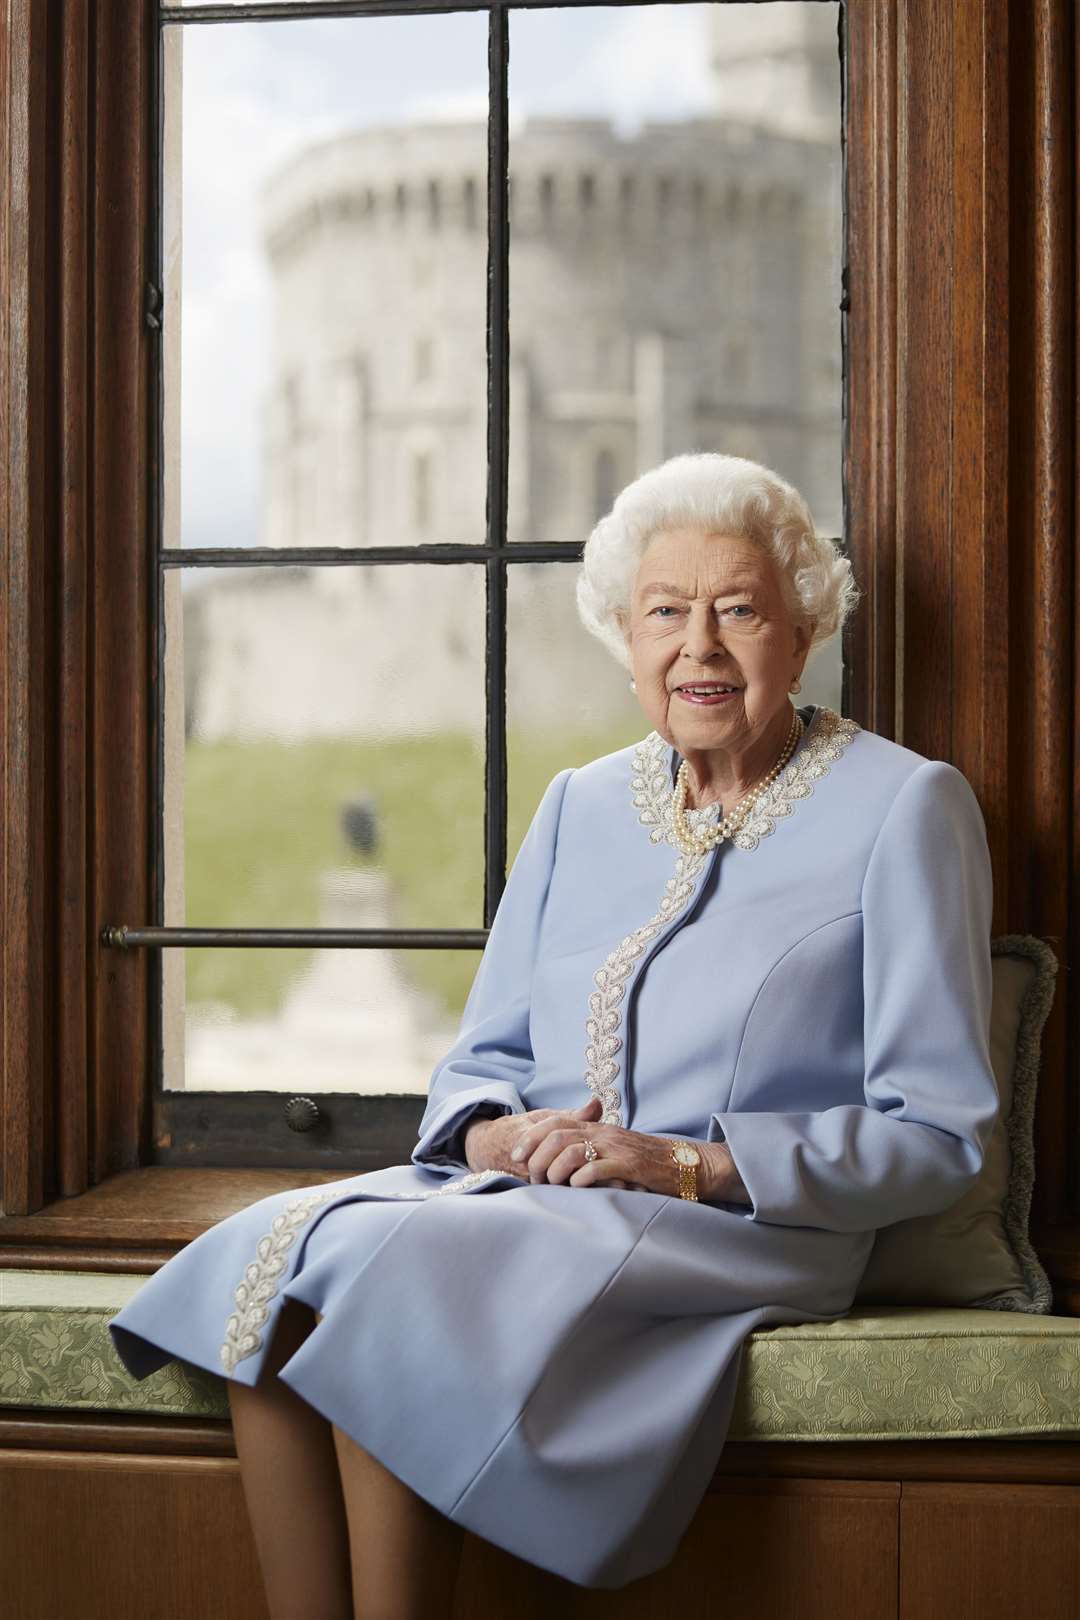 The Queen in her private apartments (Royal Household/Ranald Mackechnie/PA)